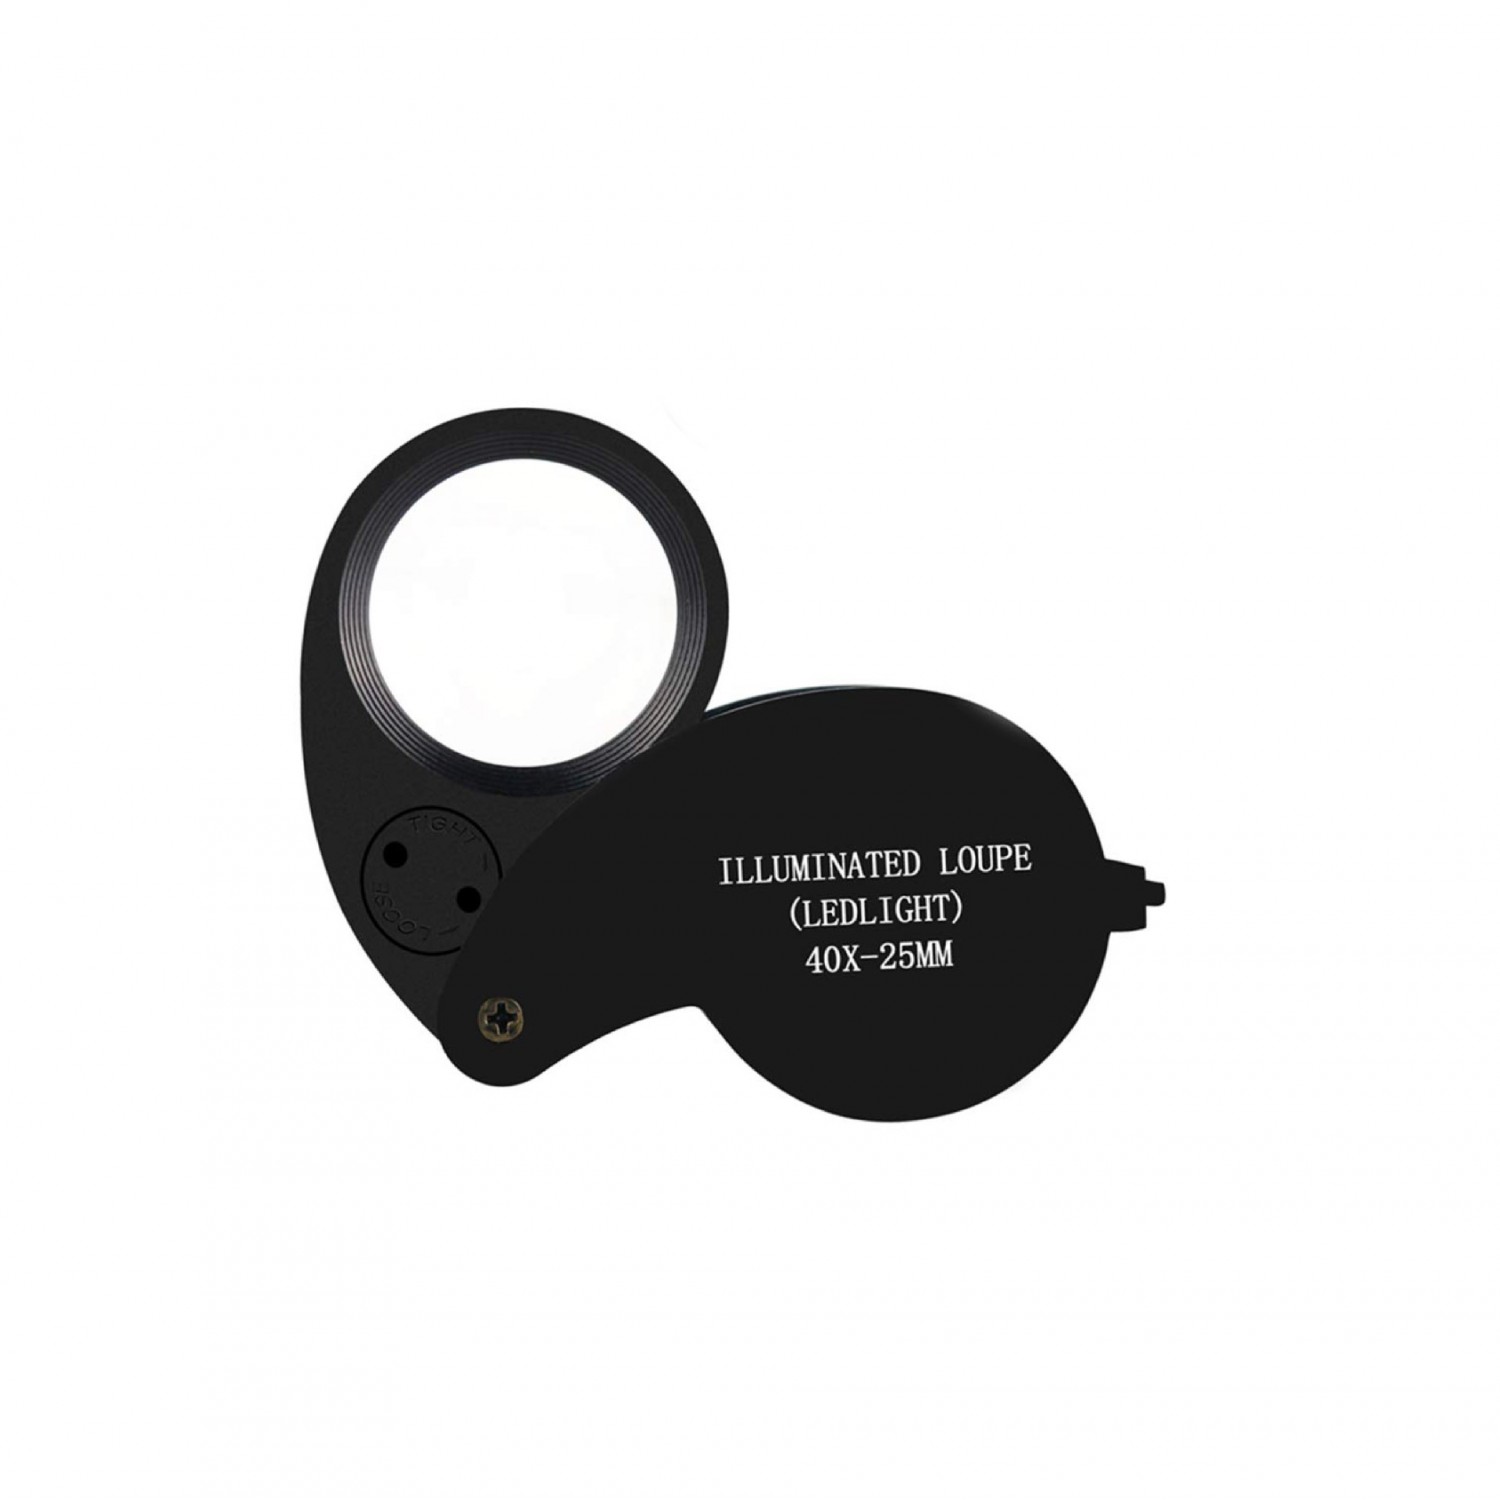 25-mm Loupe with LED